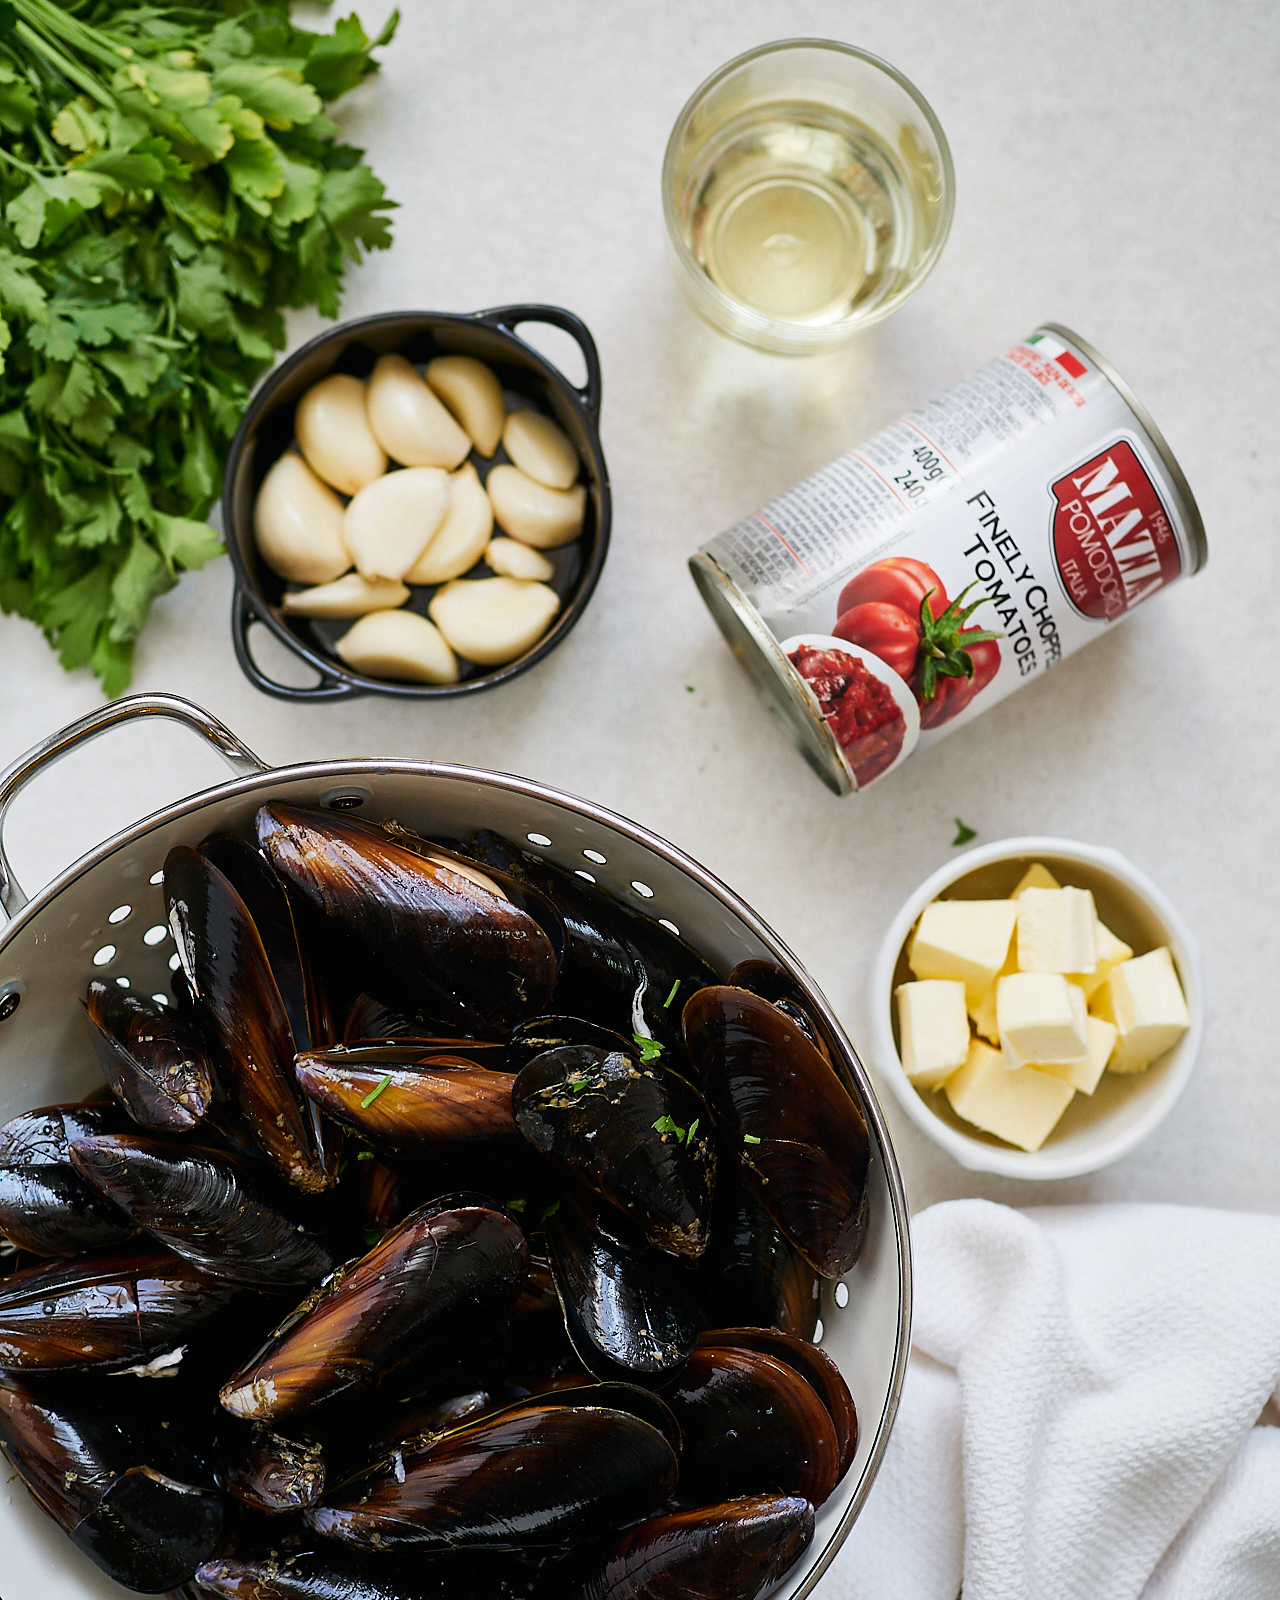 ingredients for mussels in tomato sauce